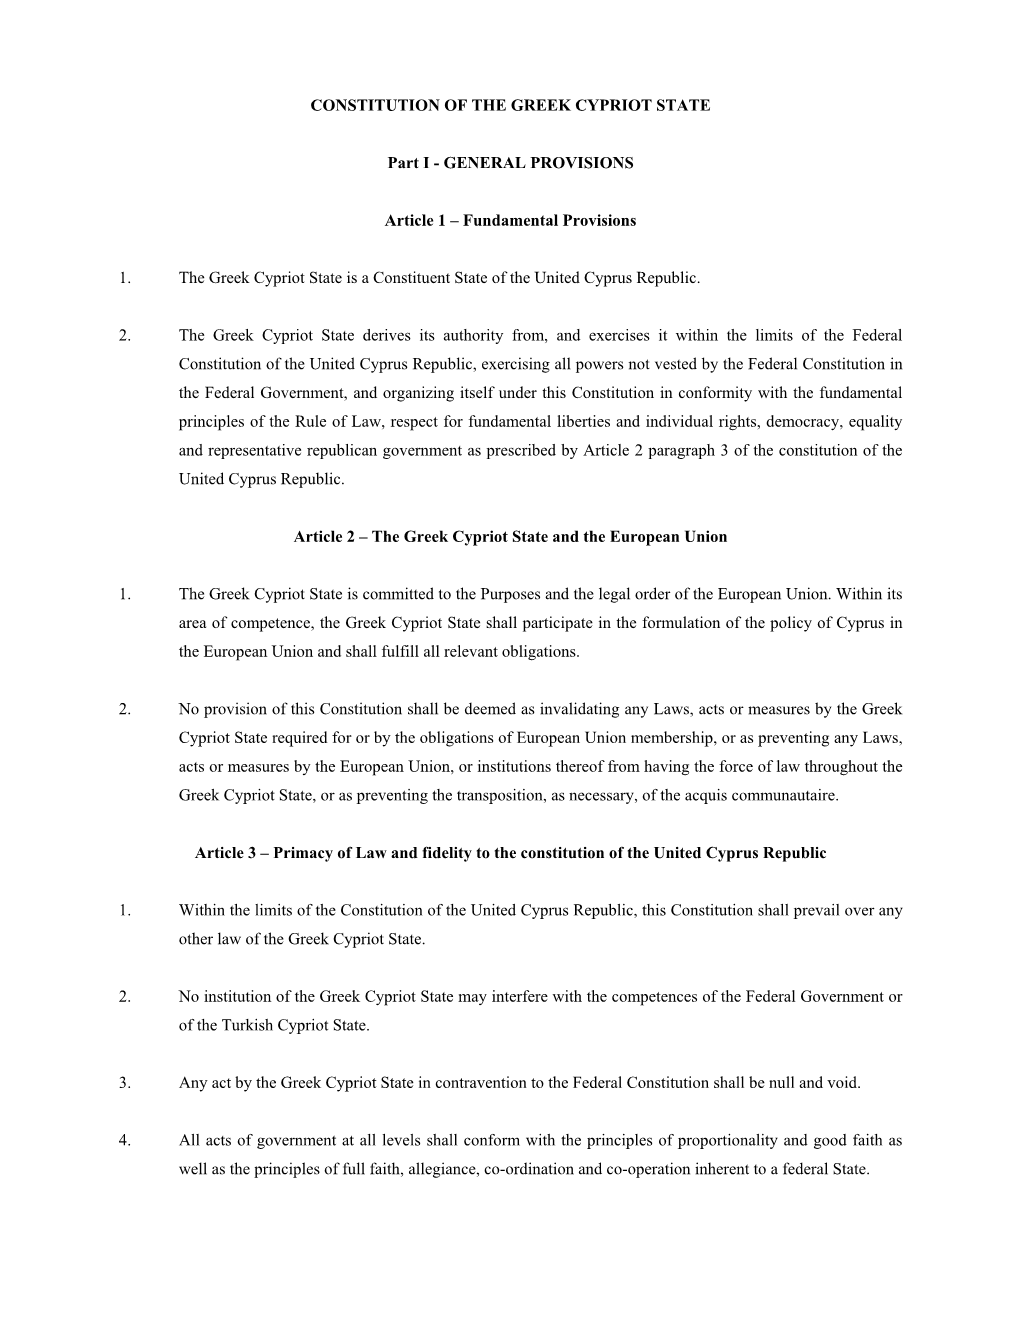 Constitution of the Greek Cypriot State